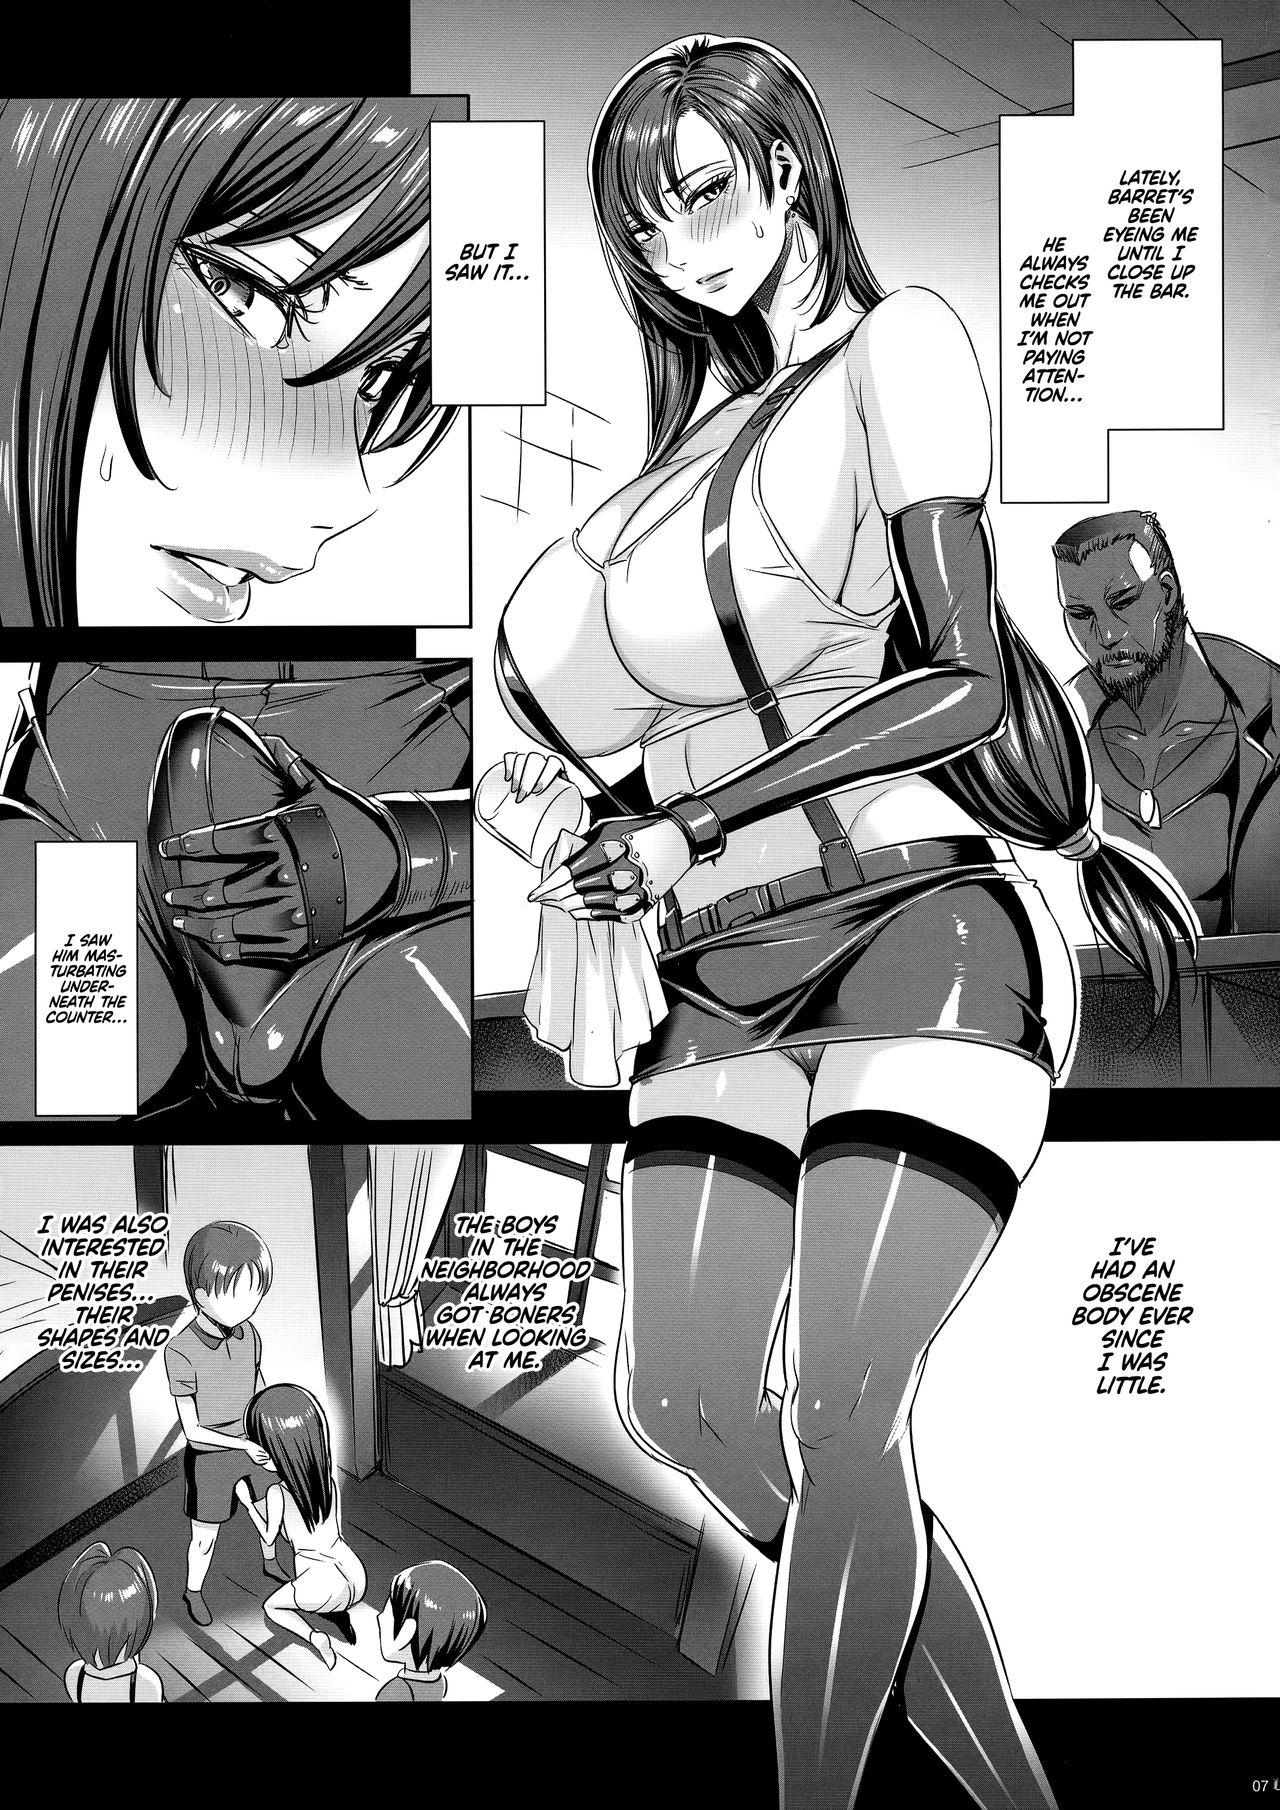 Fist Nanabangai no Onna | Sector 7 Woman - Final fantasy vii Prostitute - Page 6